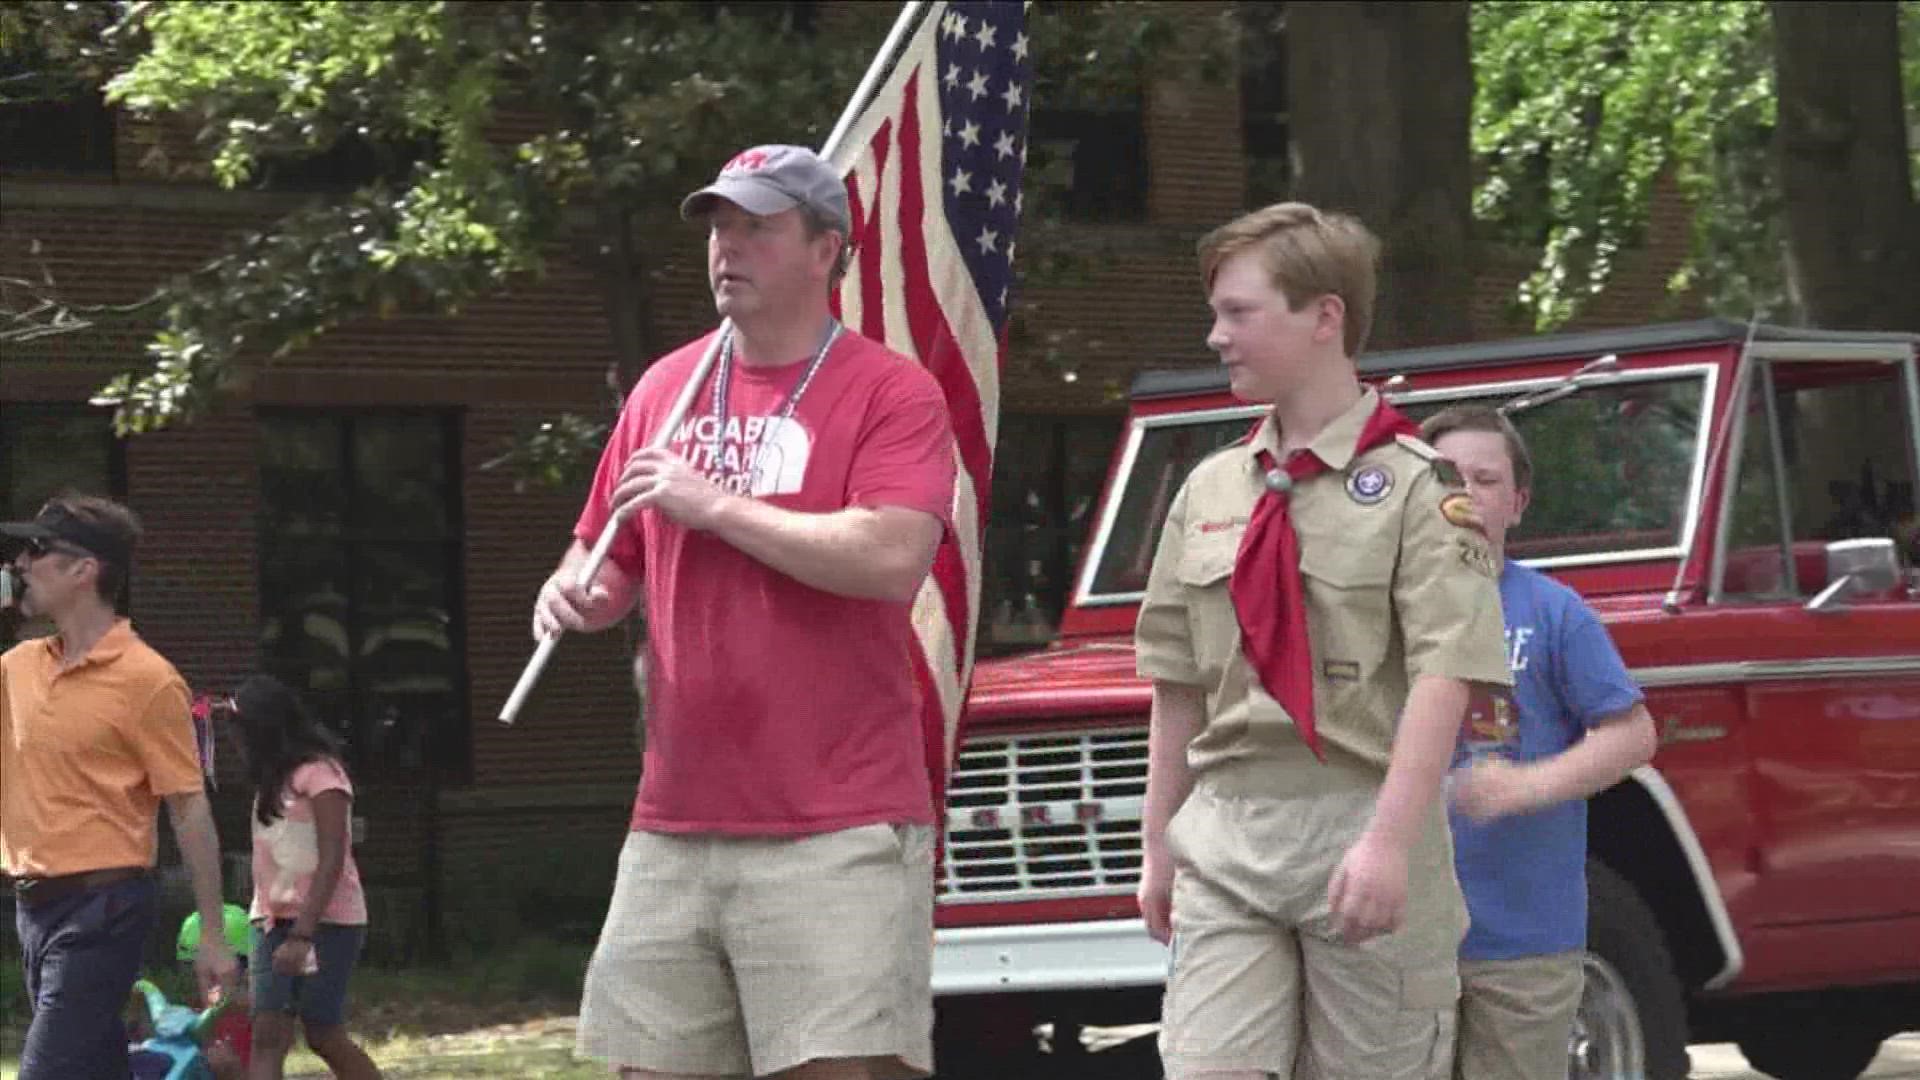 It was a fun Fourth of July morning in East Memphis, where neighbors got together for a morning parade to kick off the celebrations.